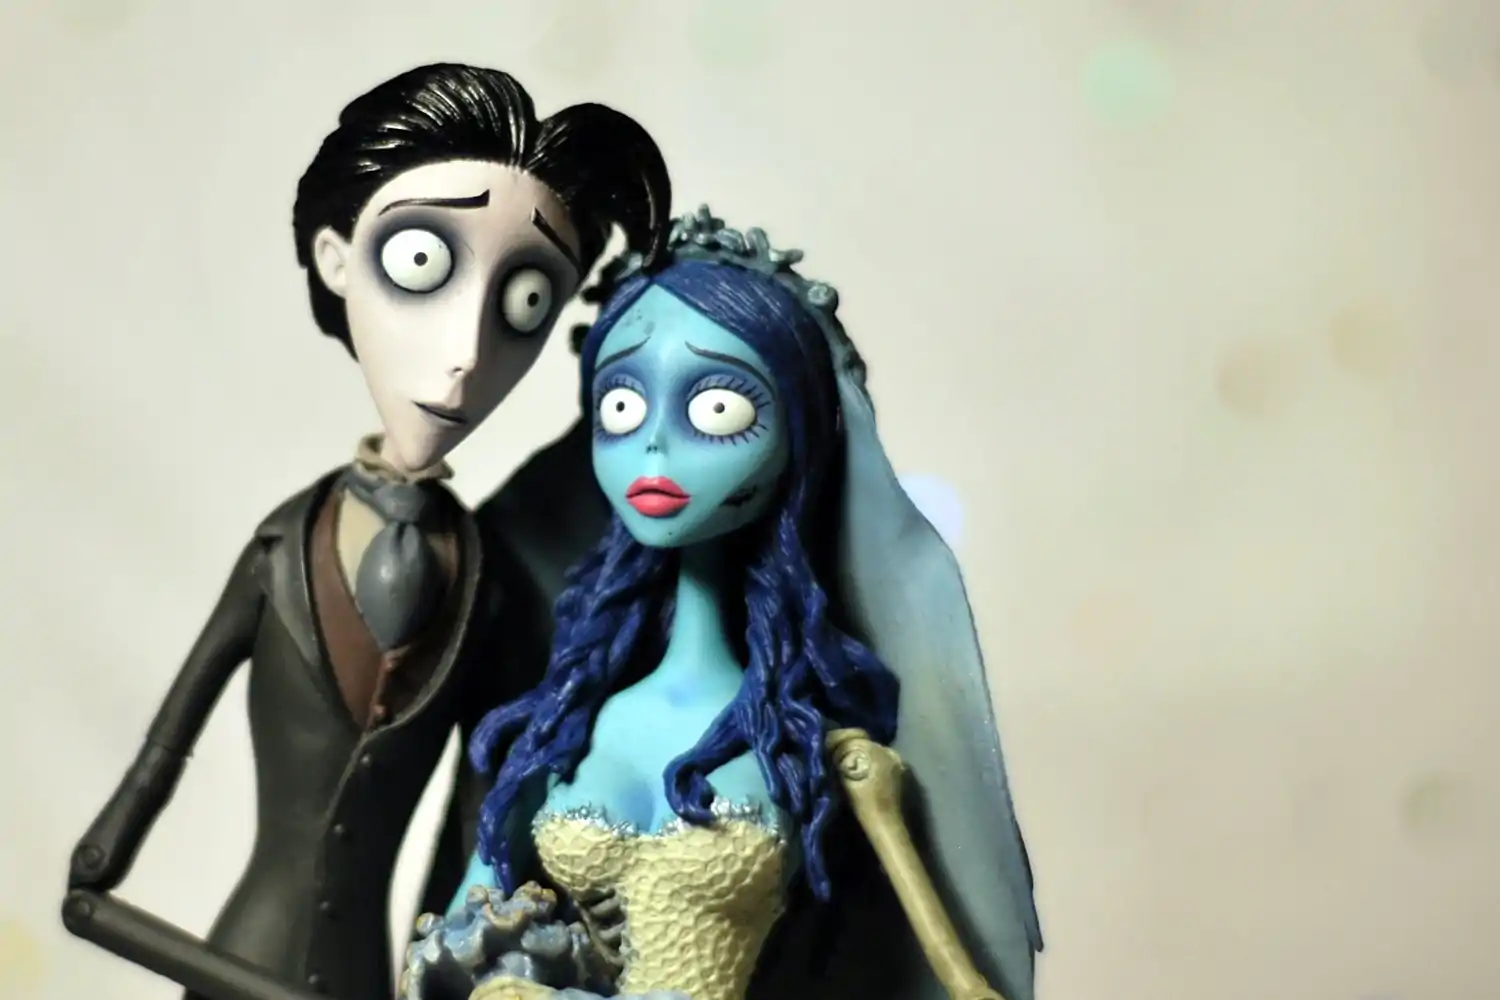 Characters from the Johnny Depp and Helena Bonham Carter movie Corpse Bride